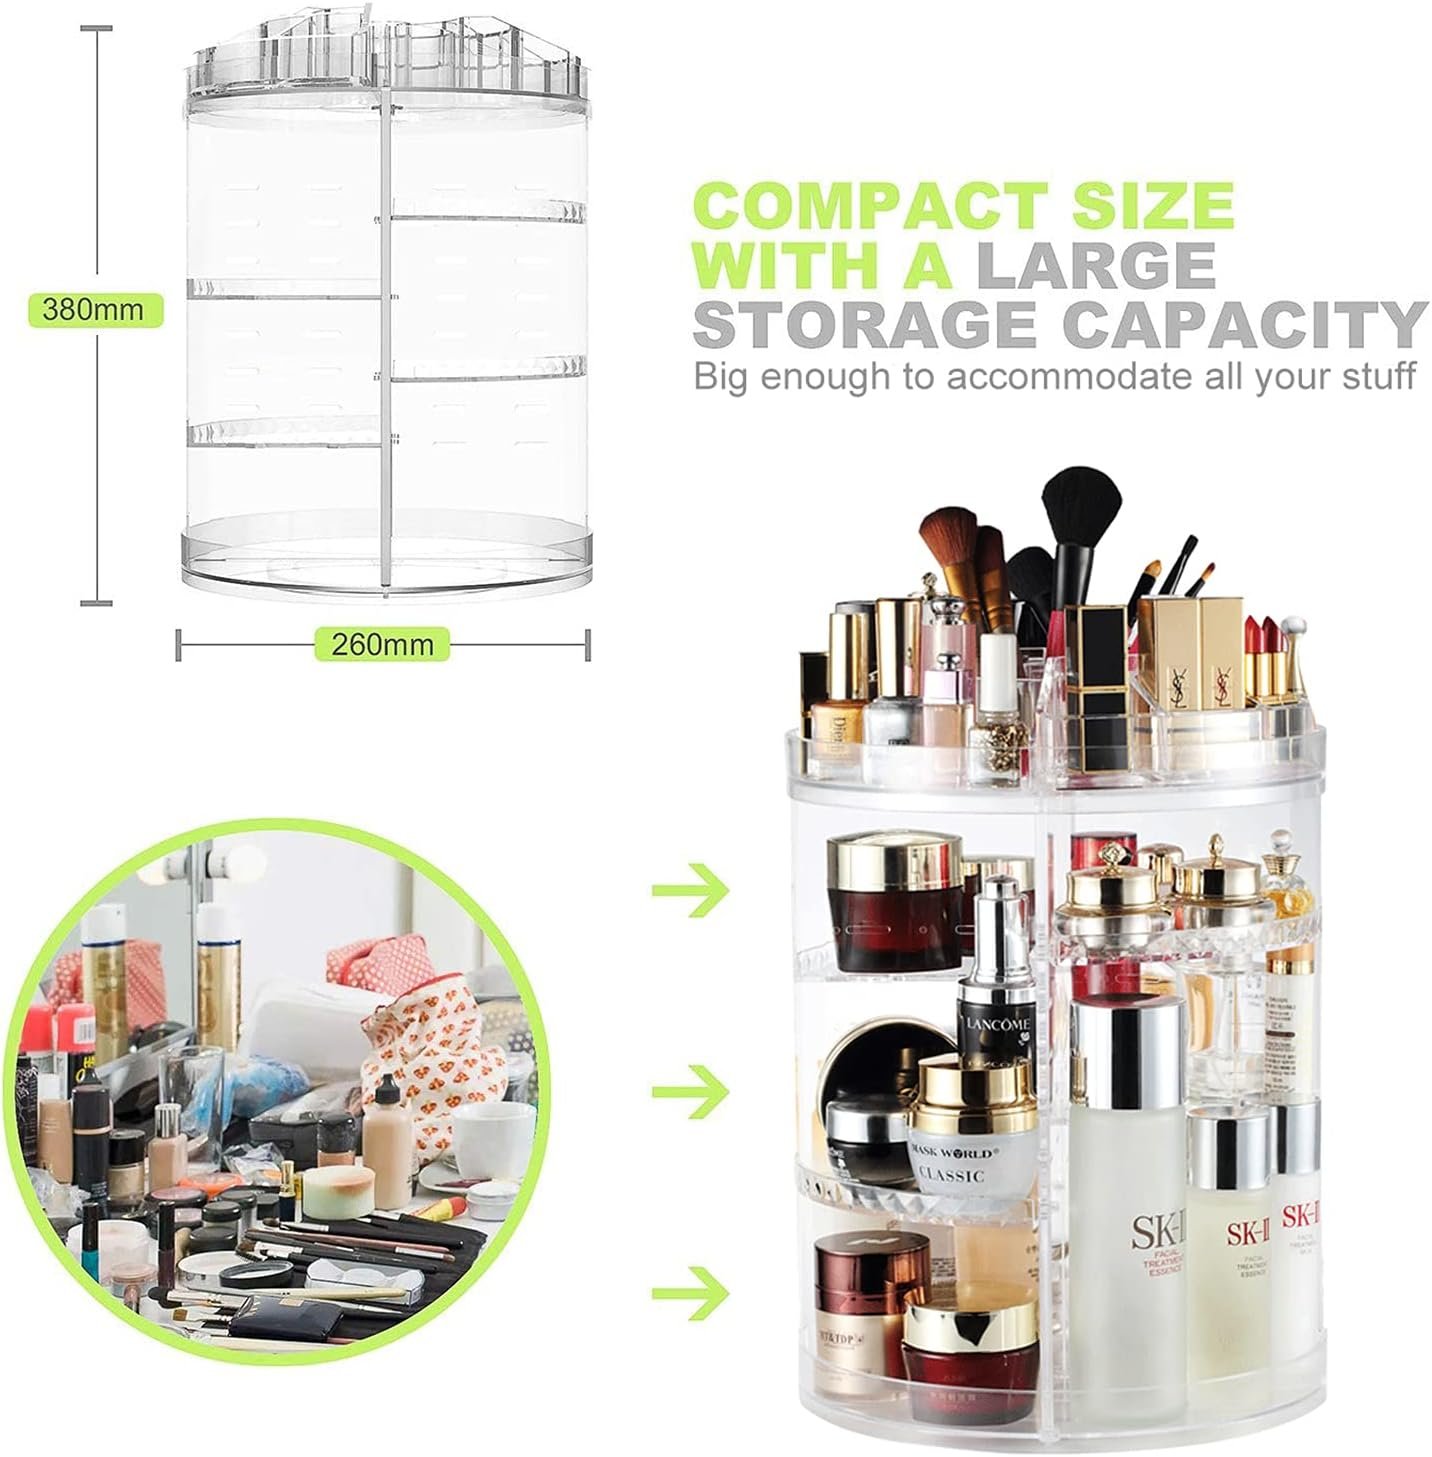 AMEITECH Makeup Organizer, 360 Degree Rotating Adjustable Cosmetic Storage Display Case with 8 Layers Large Capacity, Fits Jewelry, Makeup Brushes, Lipsticks and More, Clear Transparent